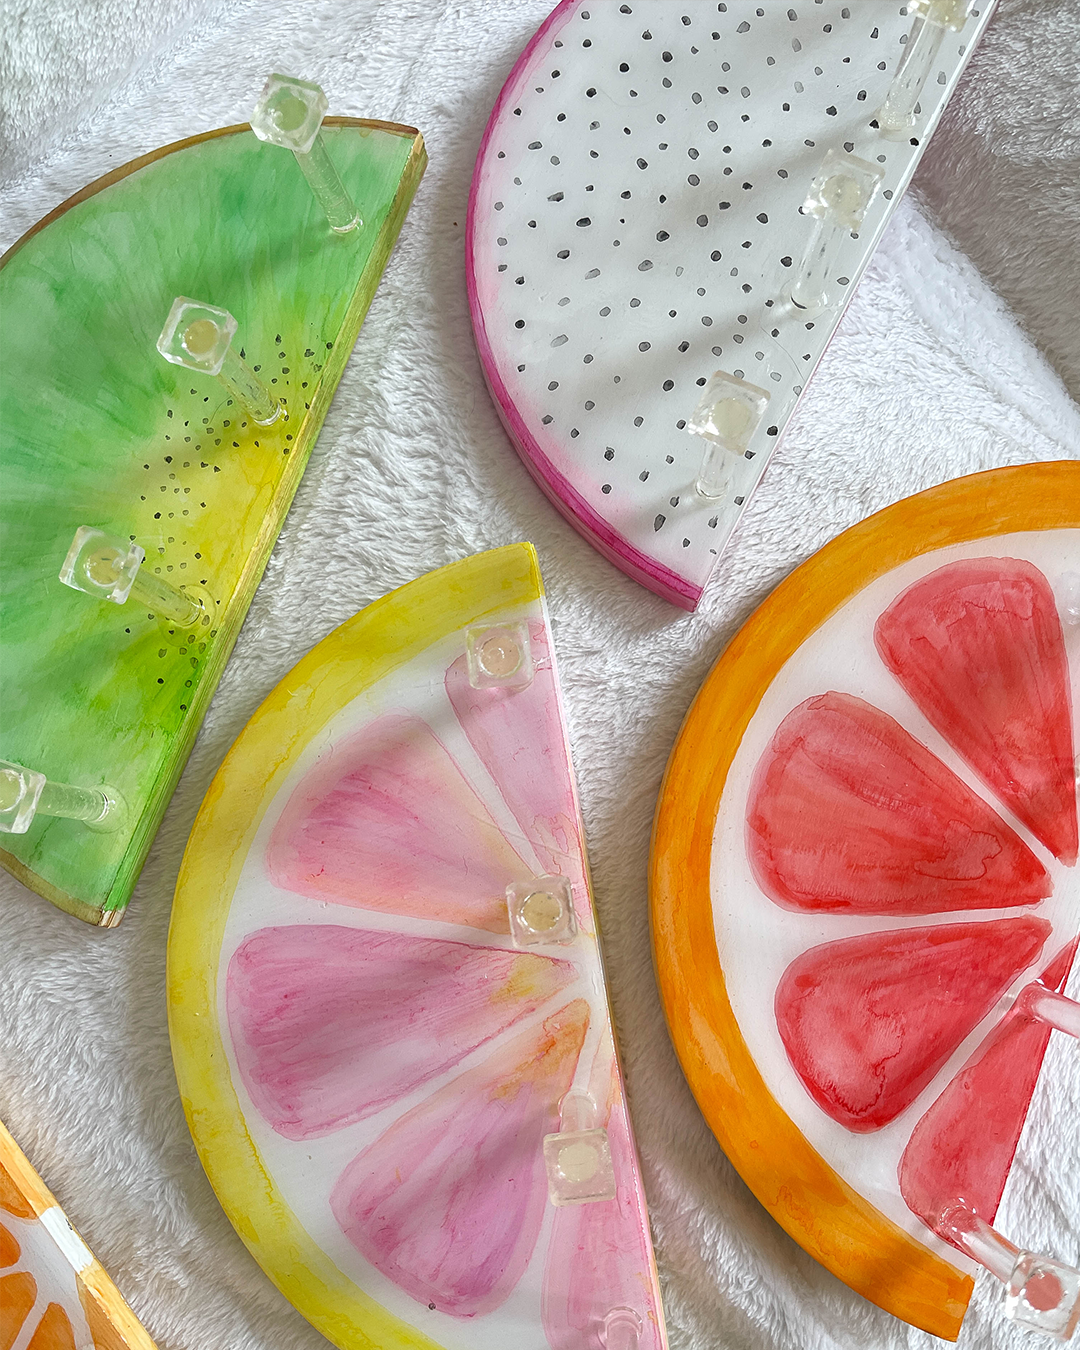 Unique hand-painted key holder inspired by a kiwi fruit slice, adding a fresh and lively look to any wall.